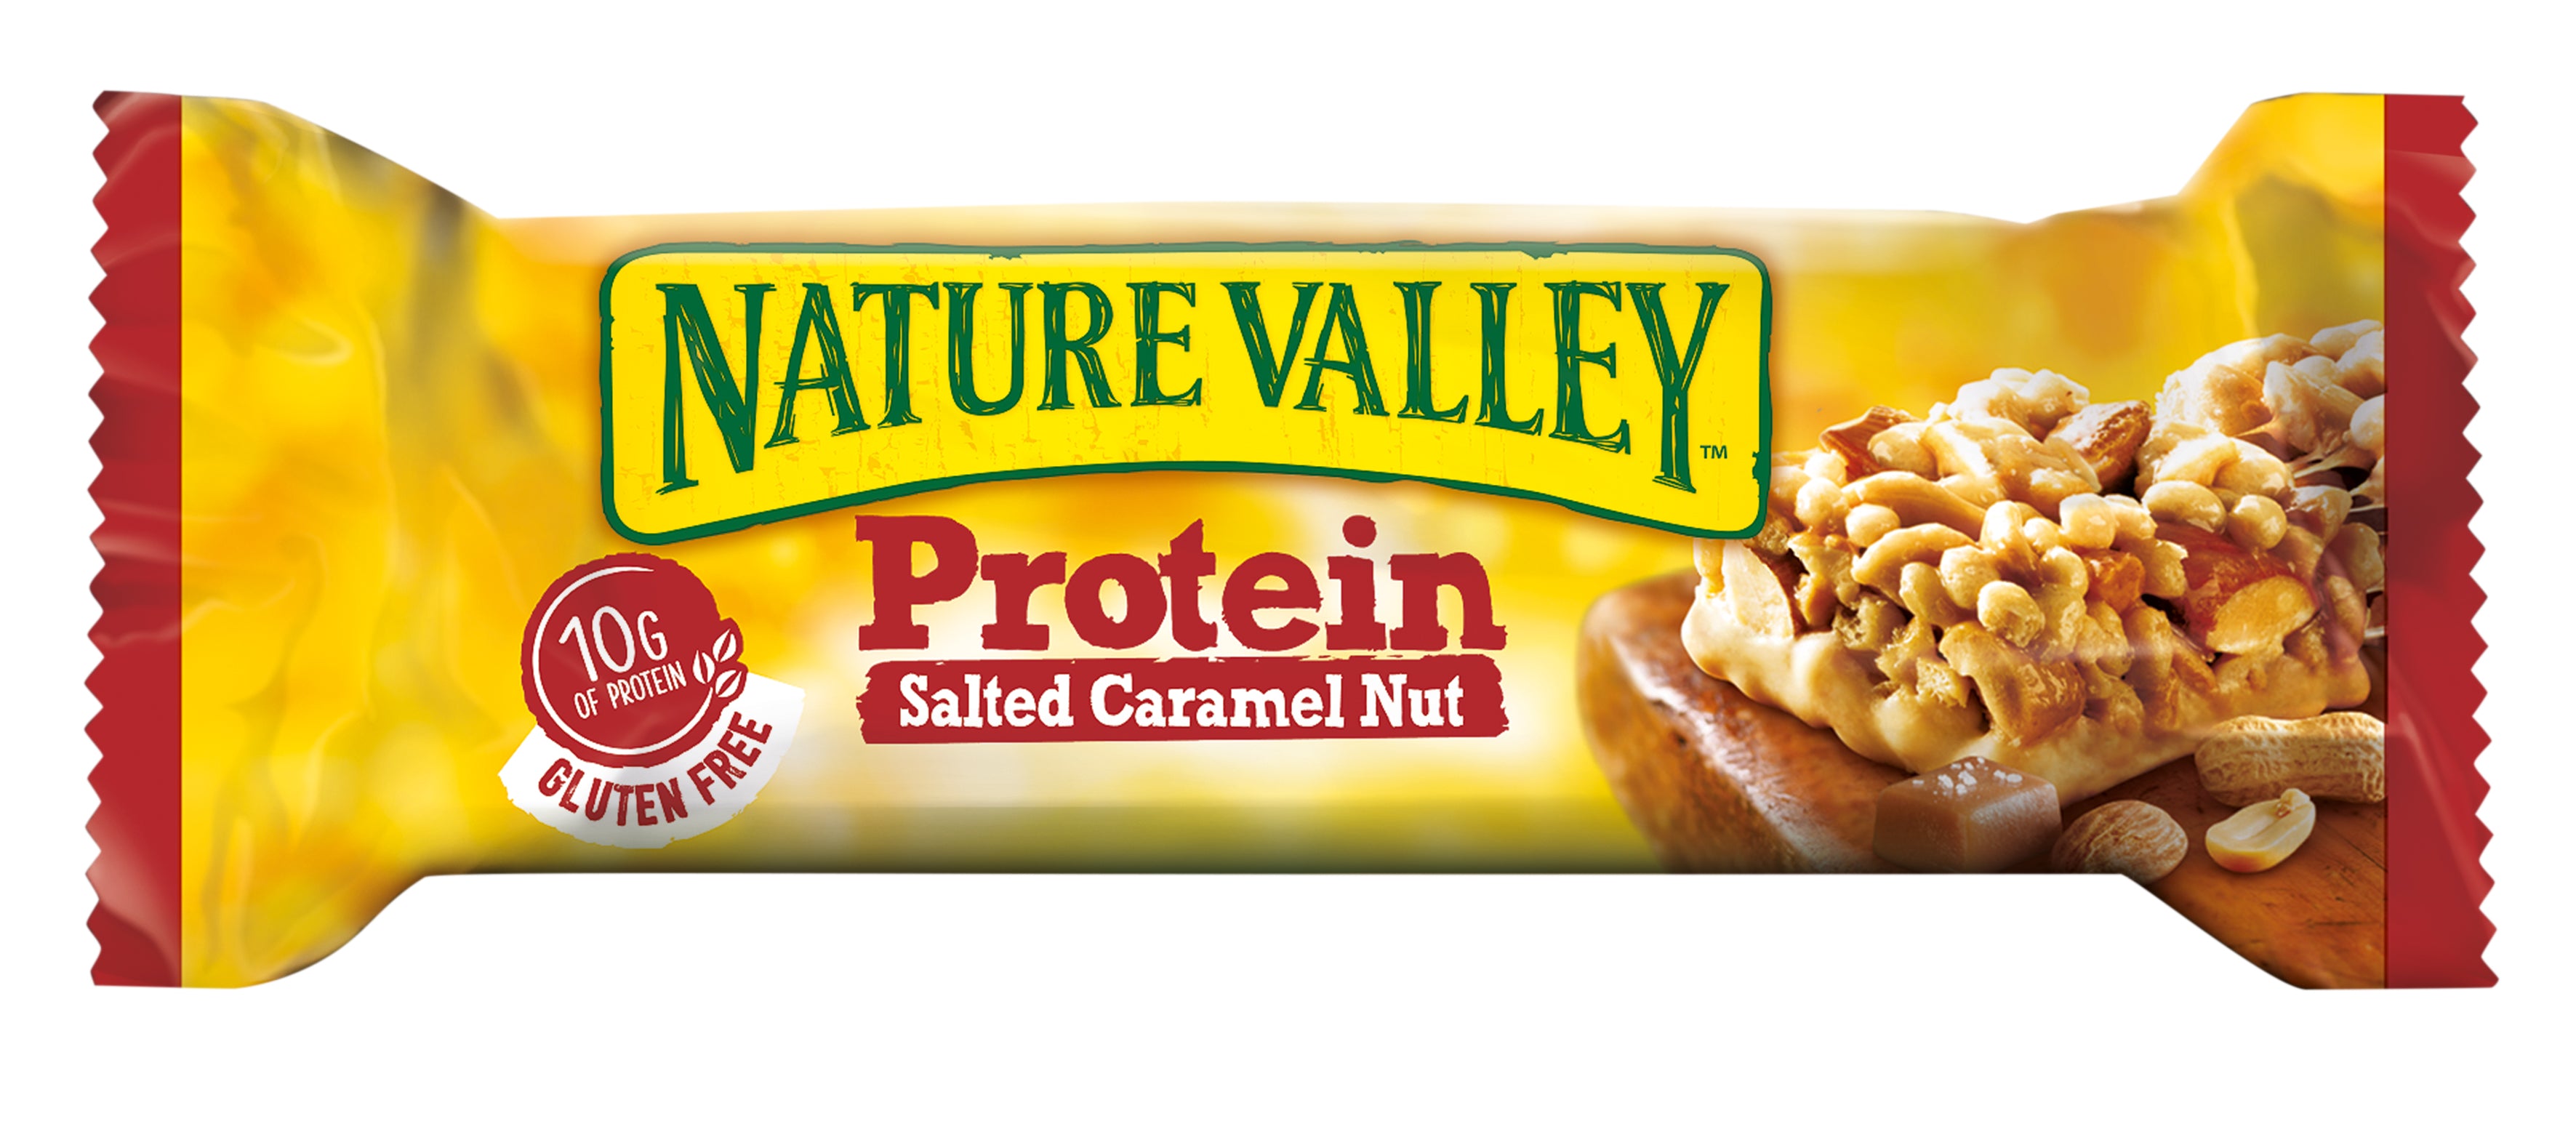 Nature Valley Protein - Chewy Nussriegel 12x40g